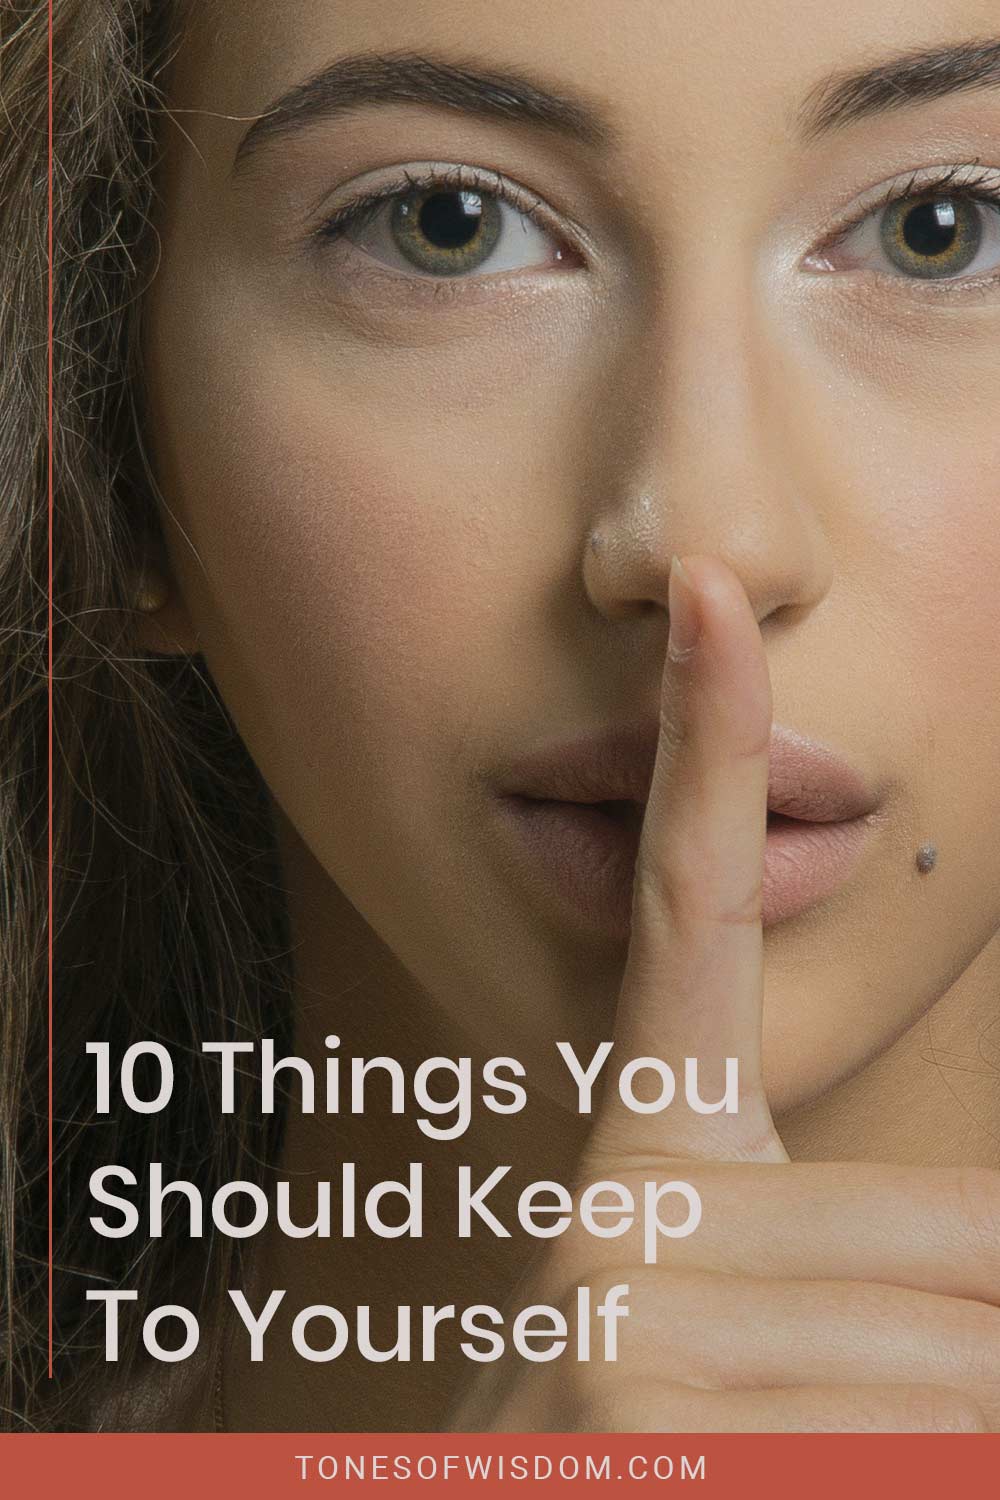 10 Things You Should Keep To Yourself